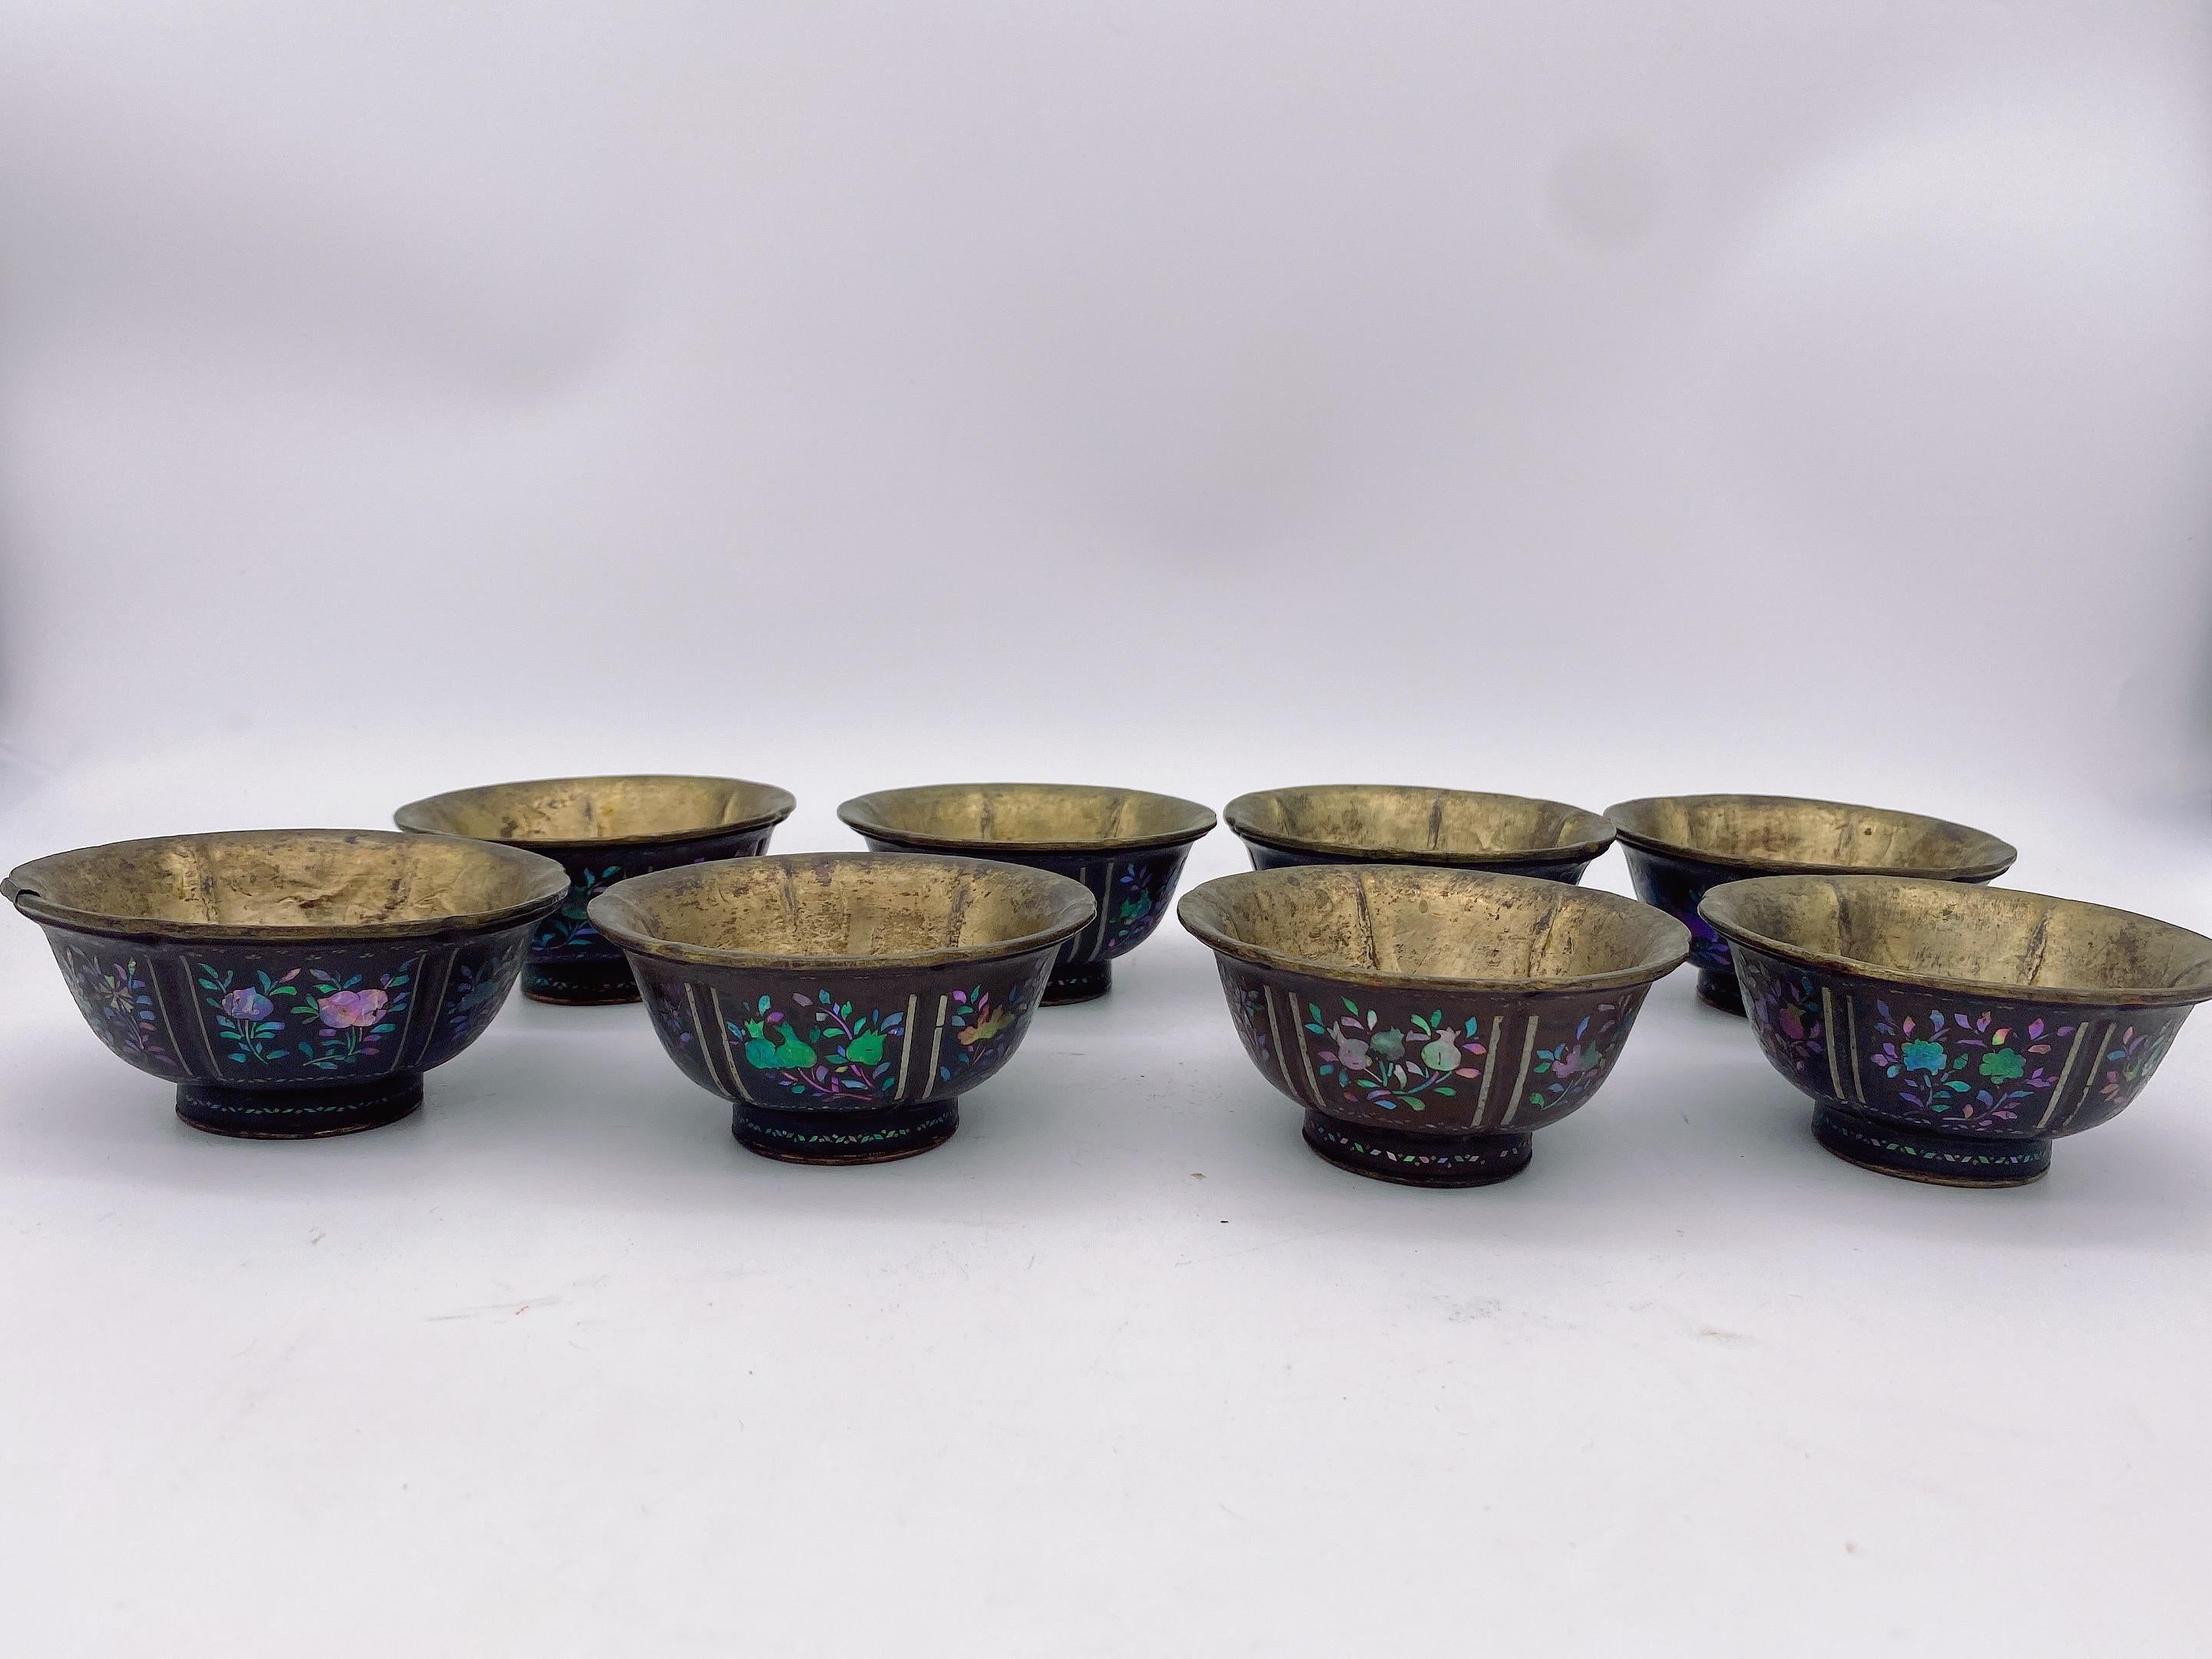 Ming 18th Century Set of 8 Chinese Silver Lacquer Bowls with Mother of Pearl Inlaid For Sale